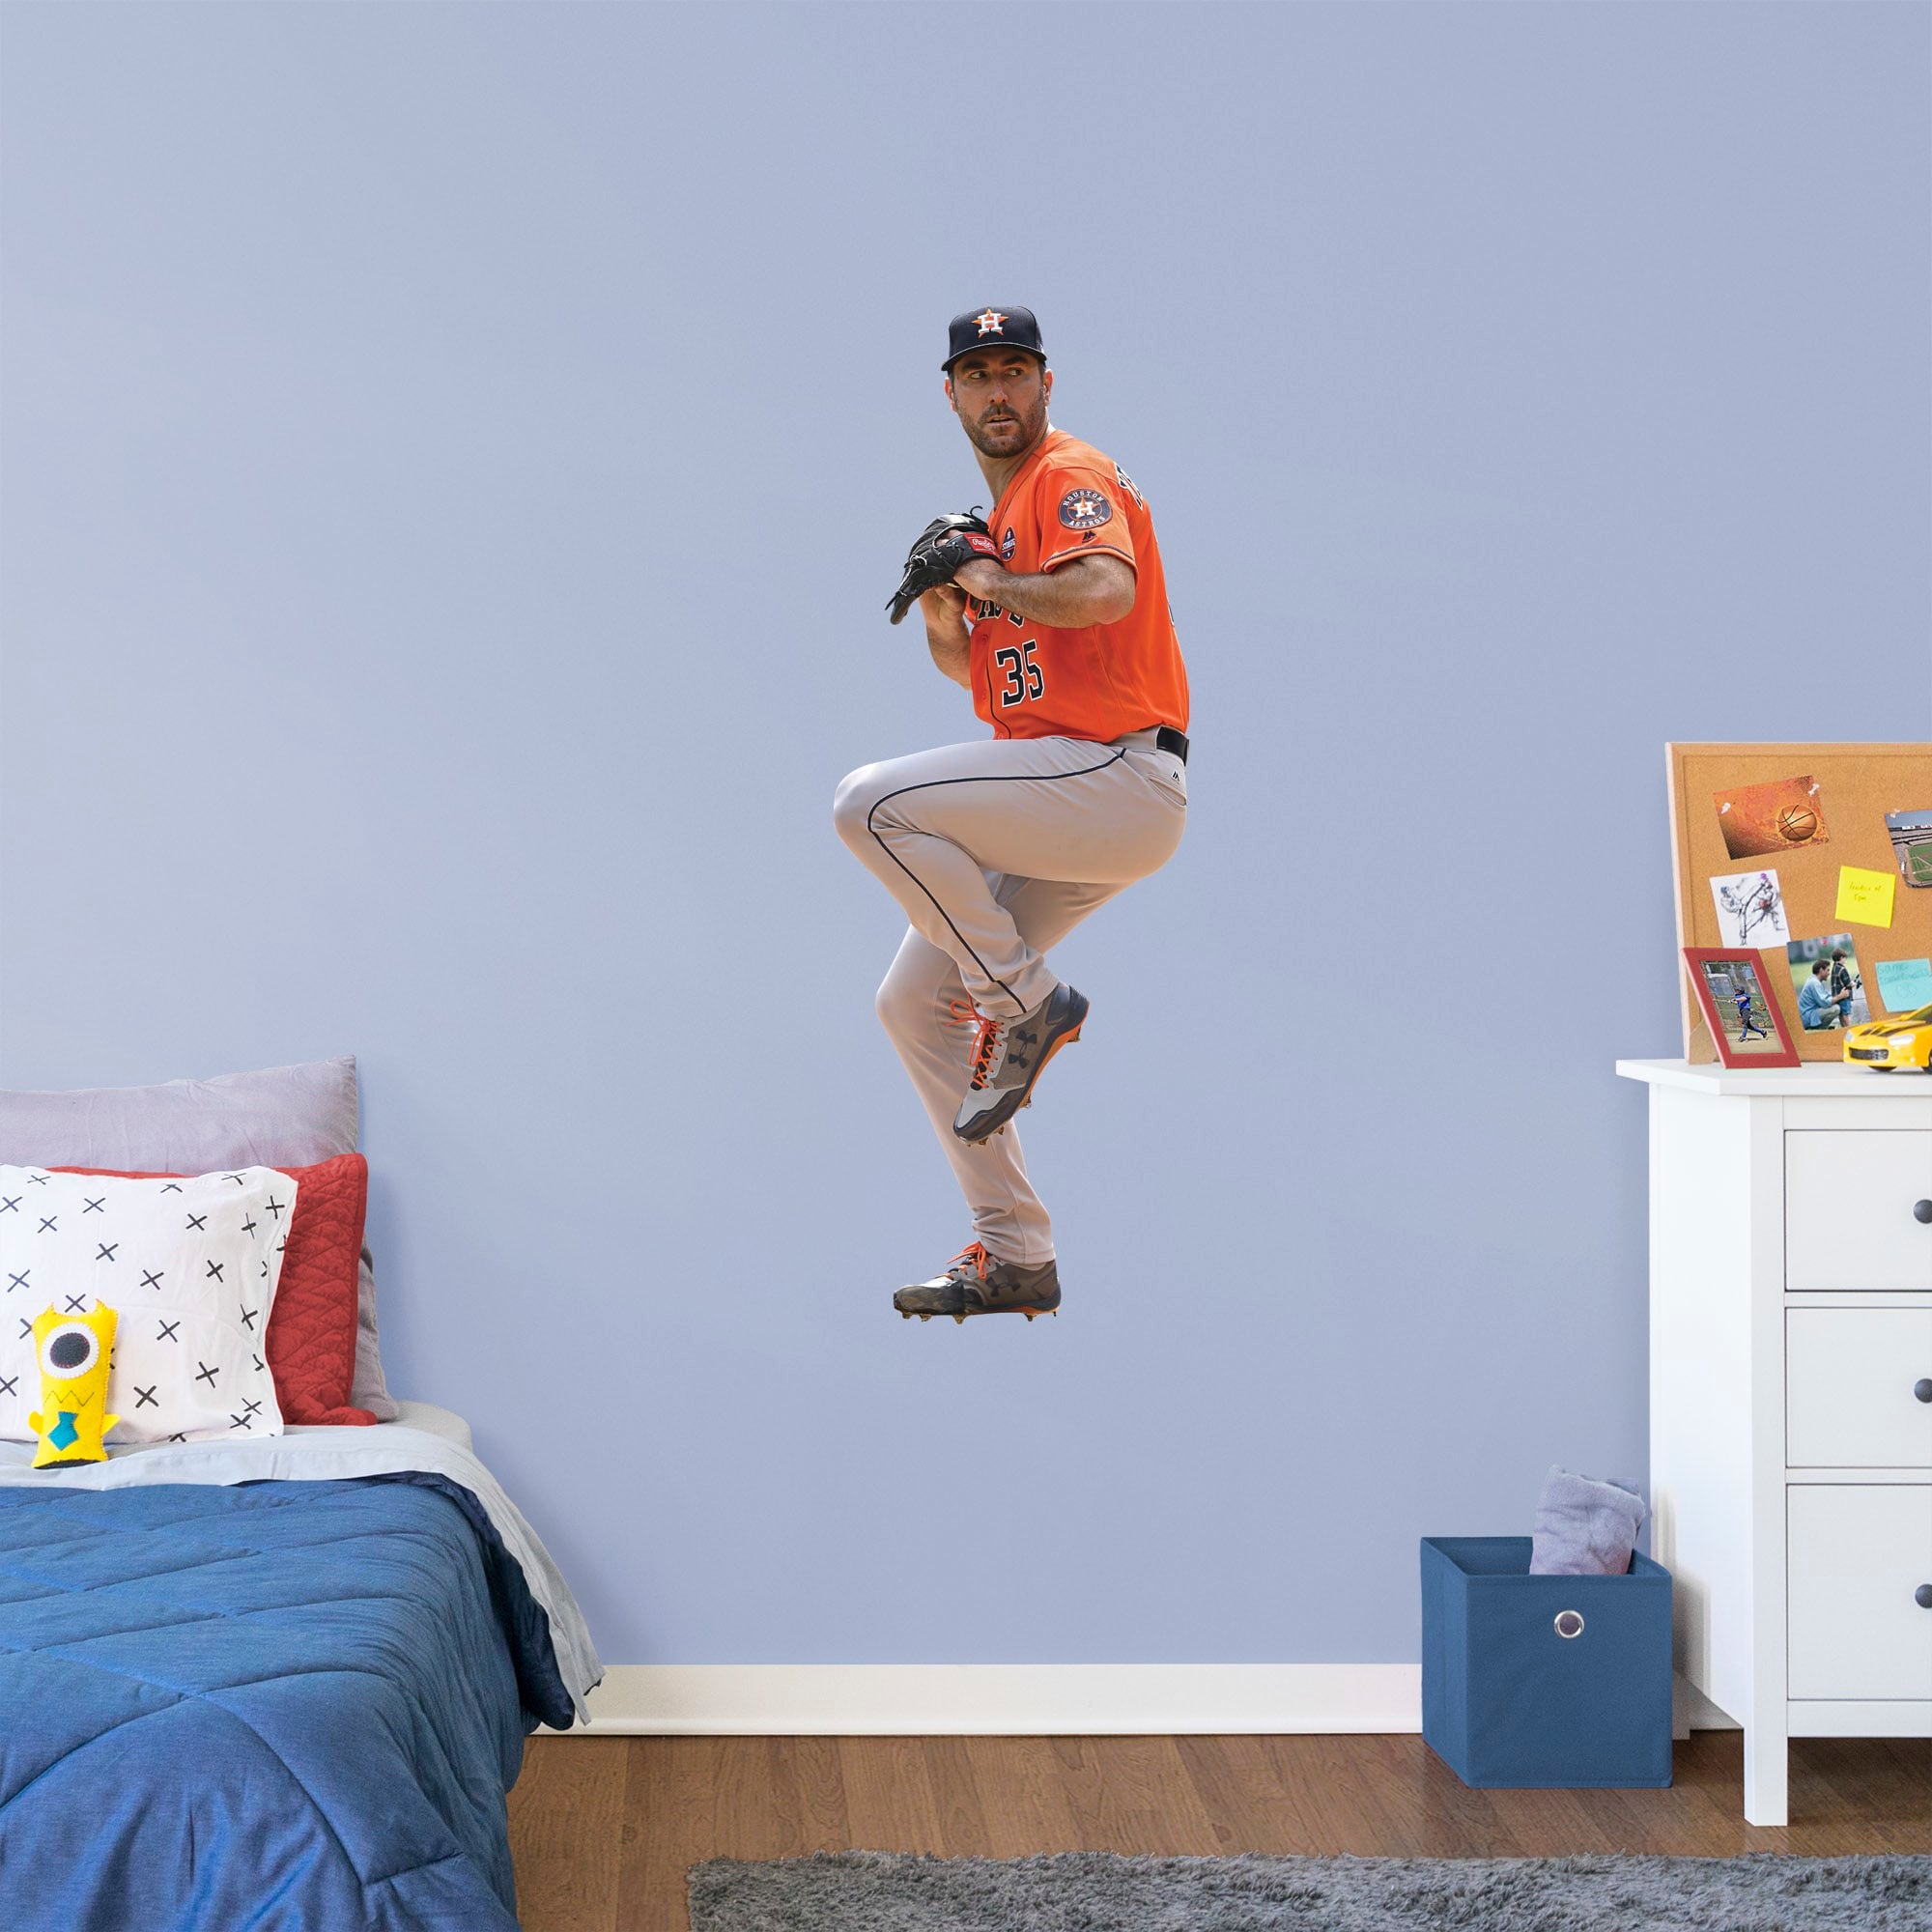 Justin Verlander for Houston Astros - Officially Licensed MLB Removable Wall Decal Giant Athlete + 2 Decals (18"W x 51"H) by Fat